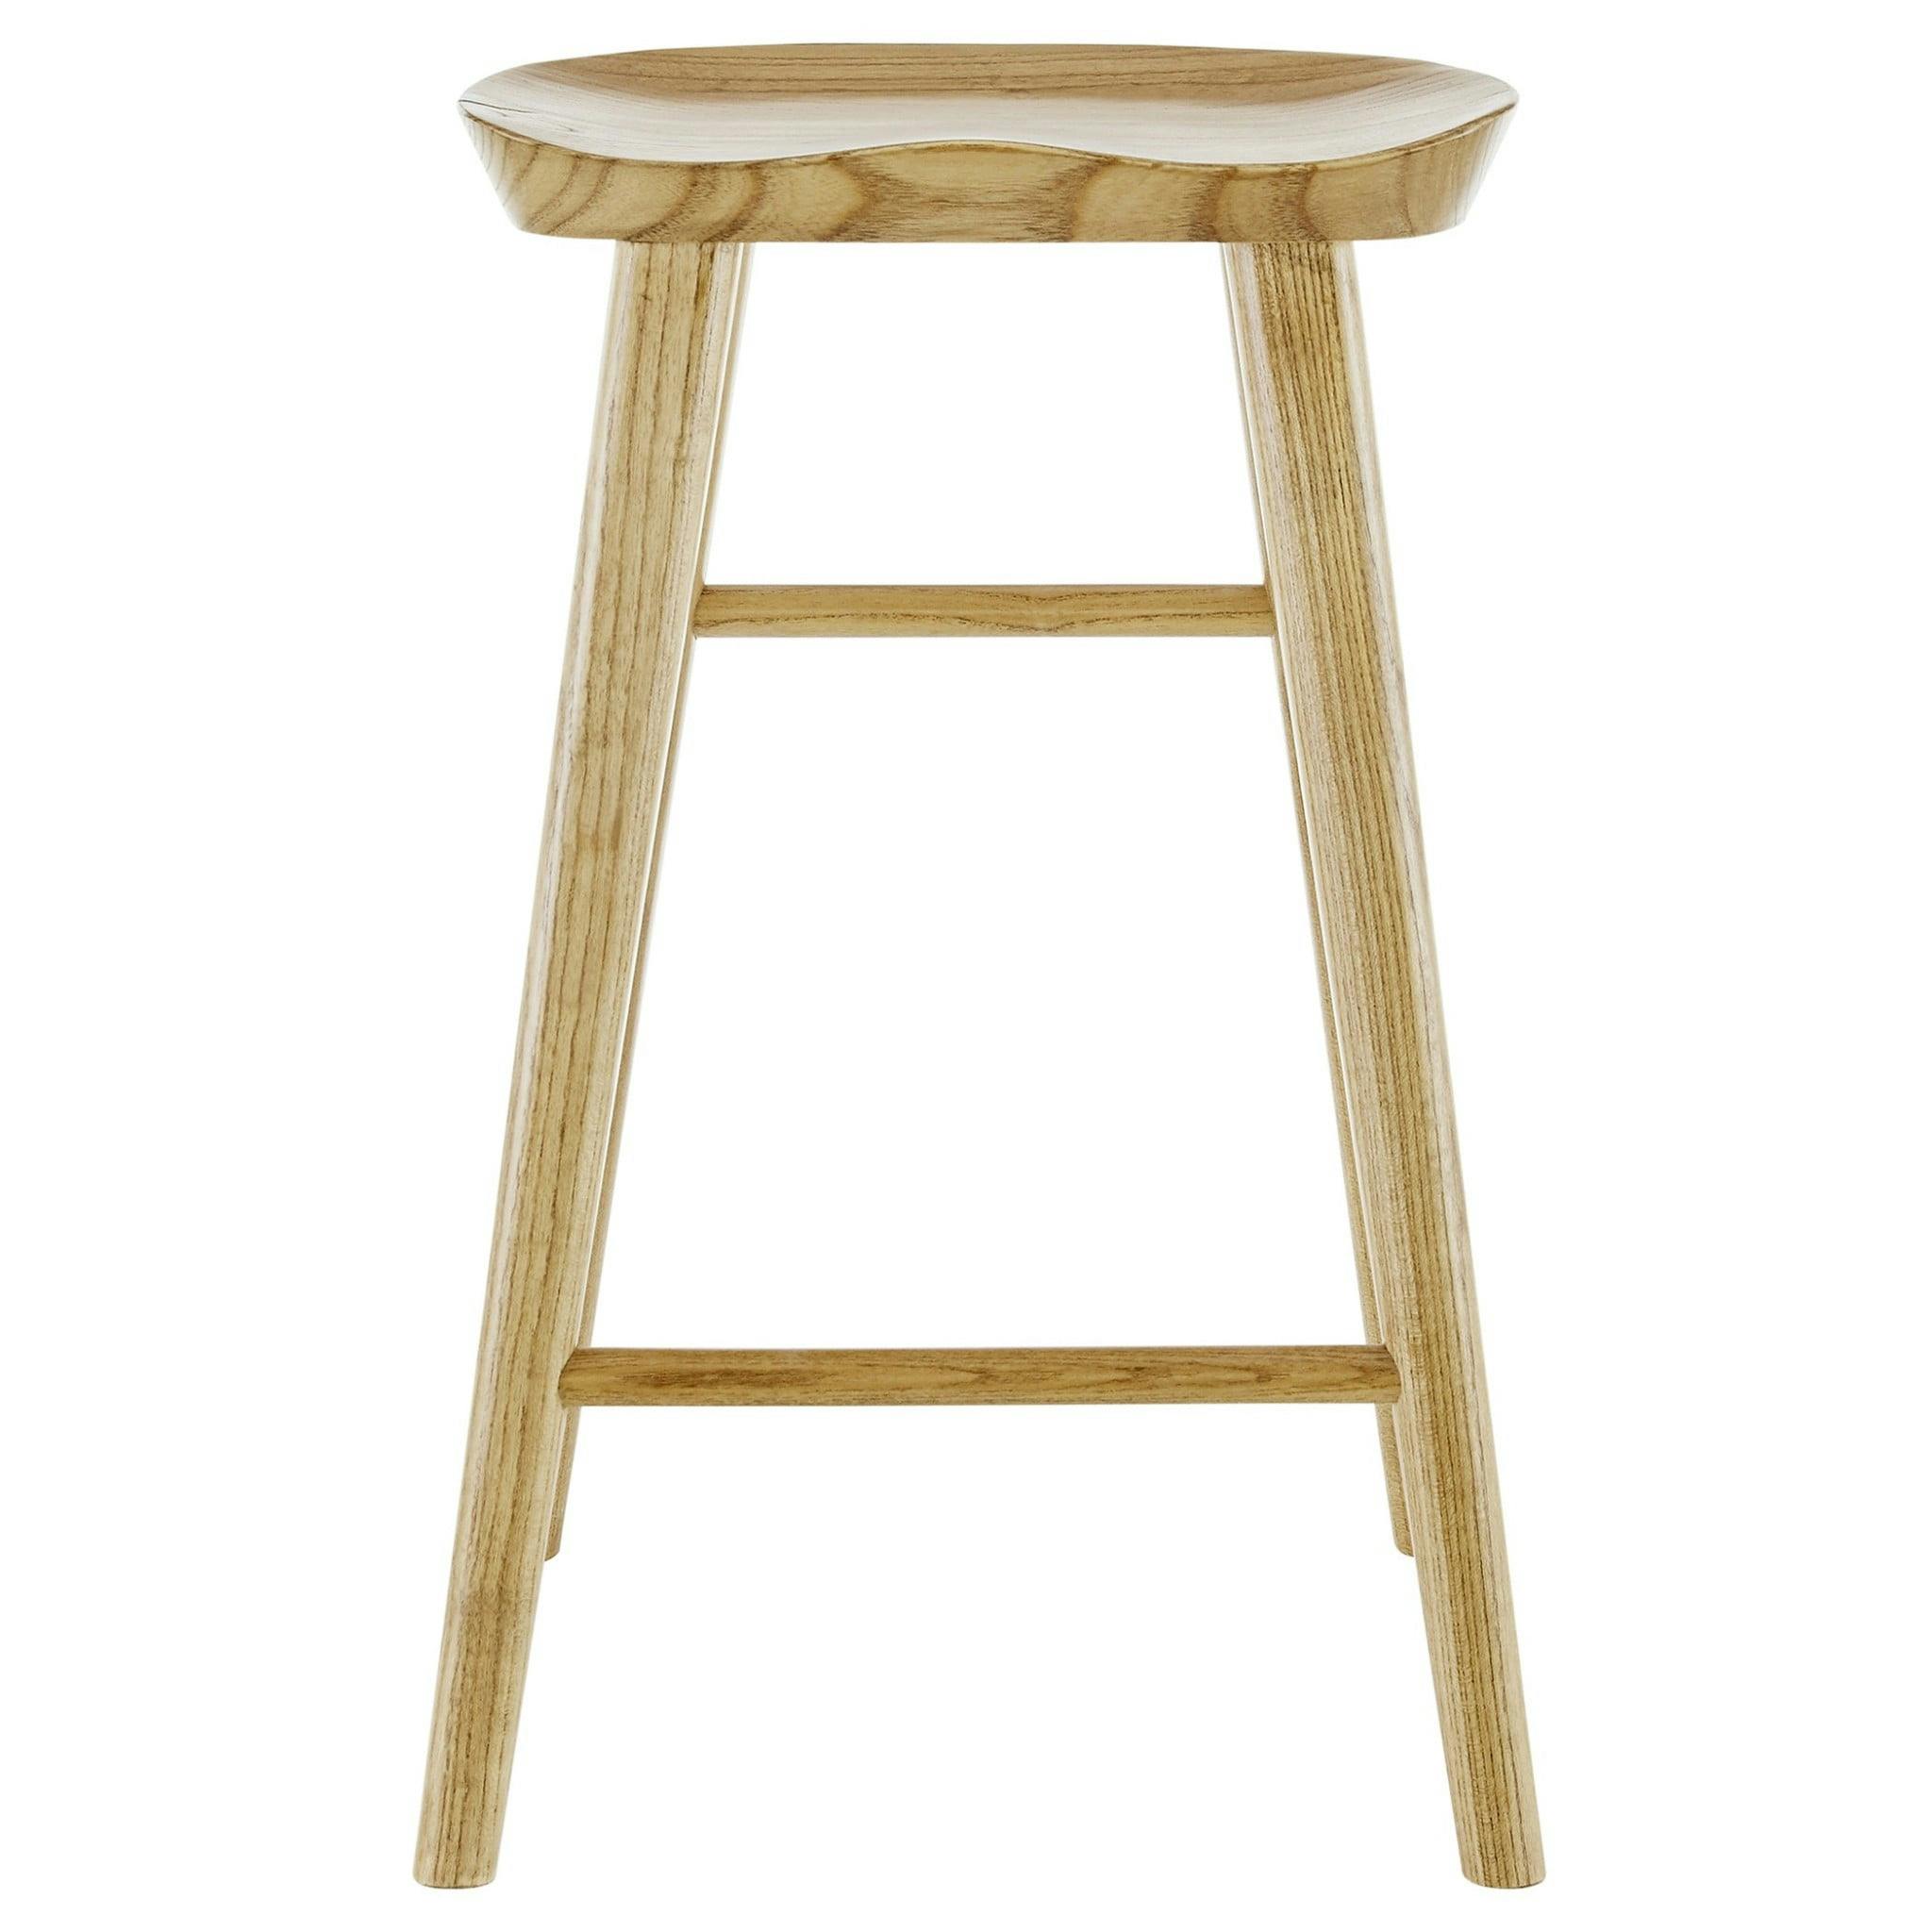 25.75" Natural Elm Wood Tapered Counter Stool with Contoured Seat